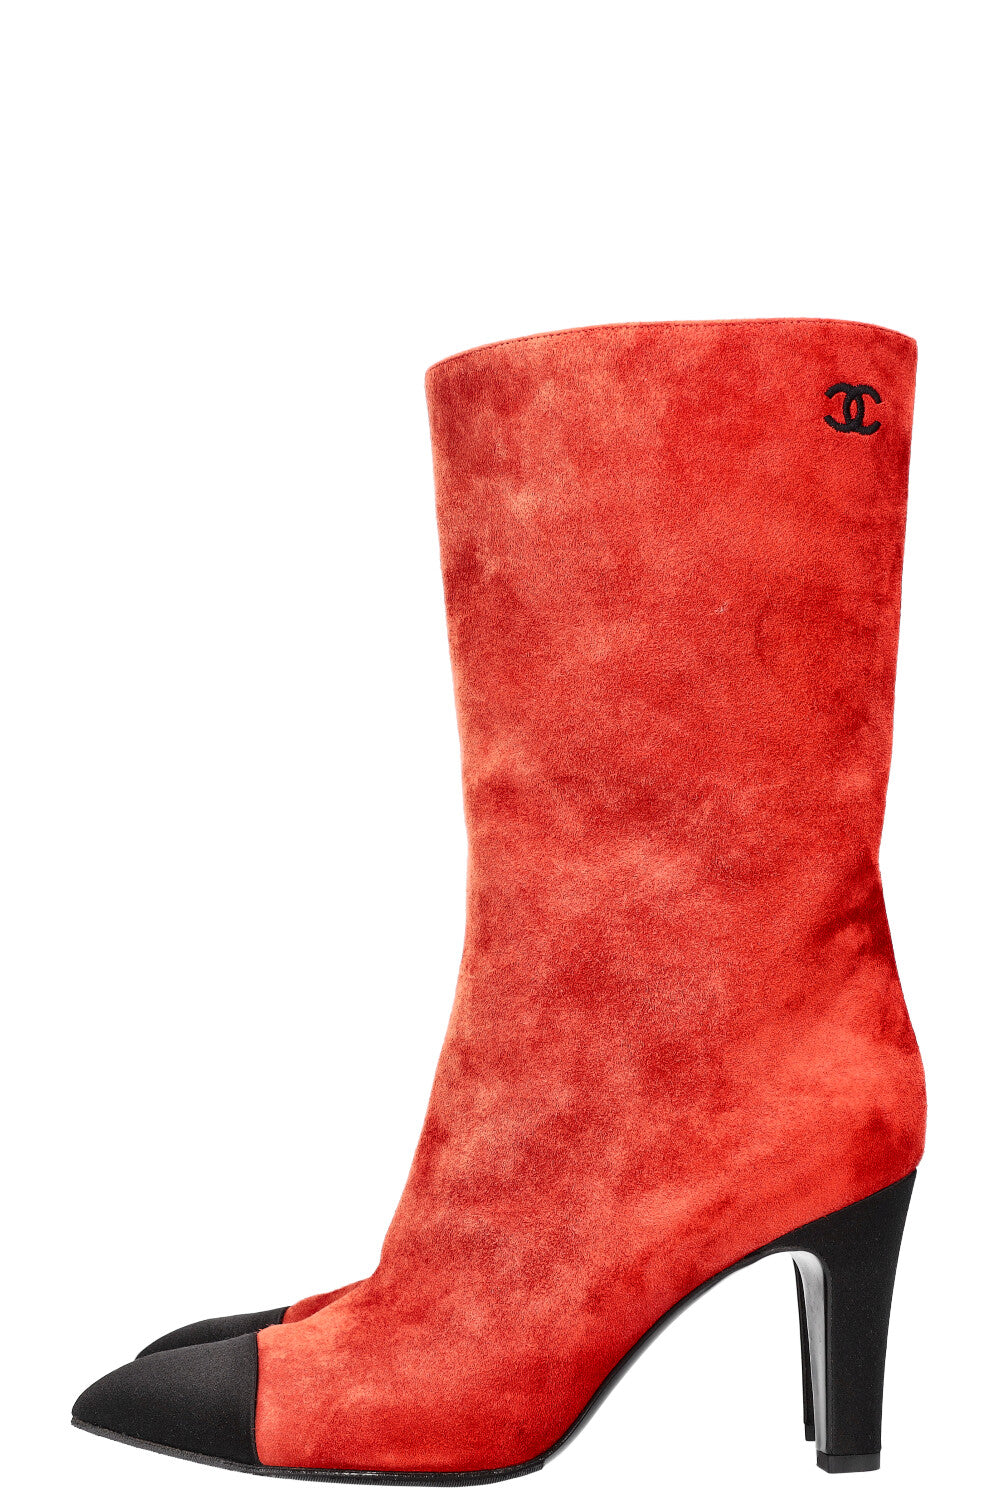 CHANEL Gabrielle Ankle Boots Suede Red